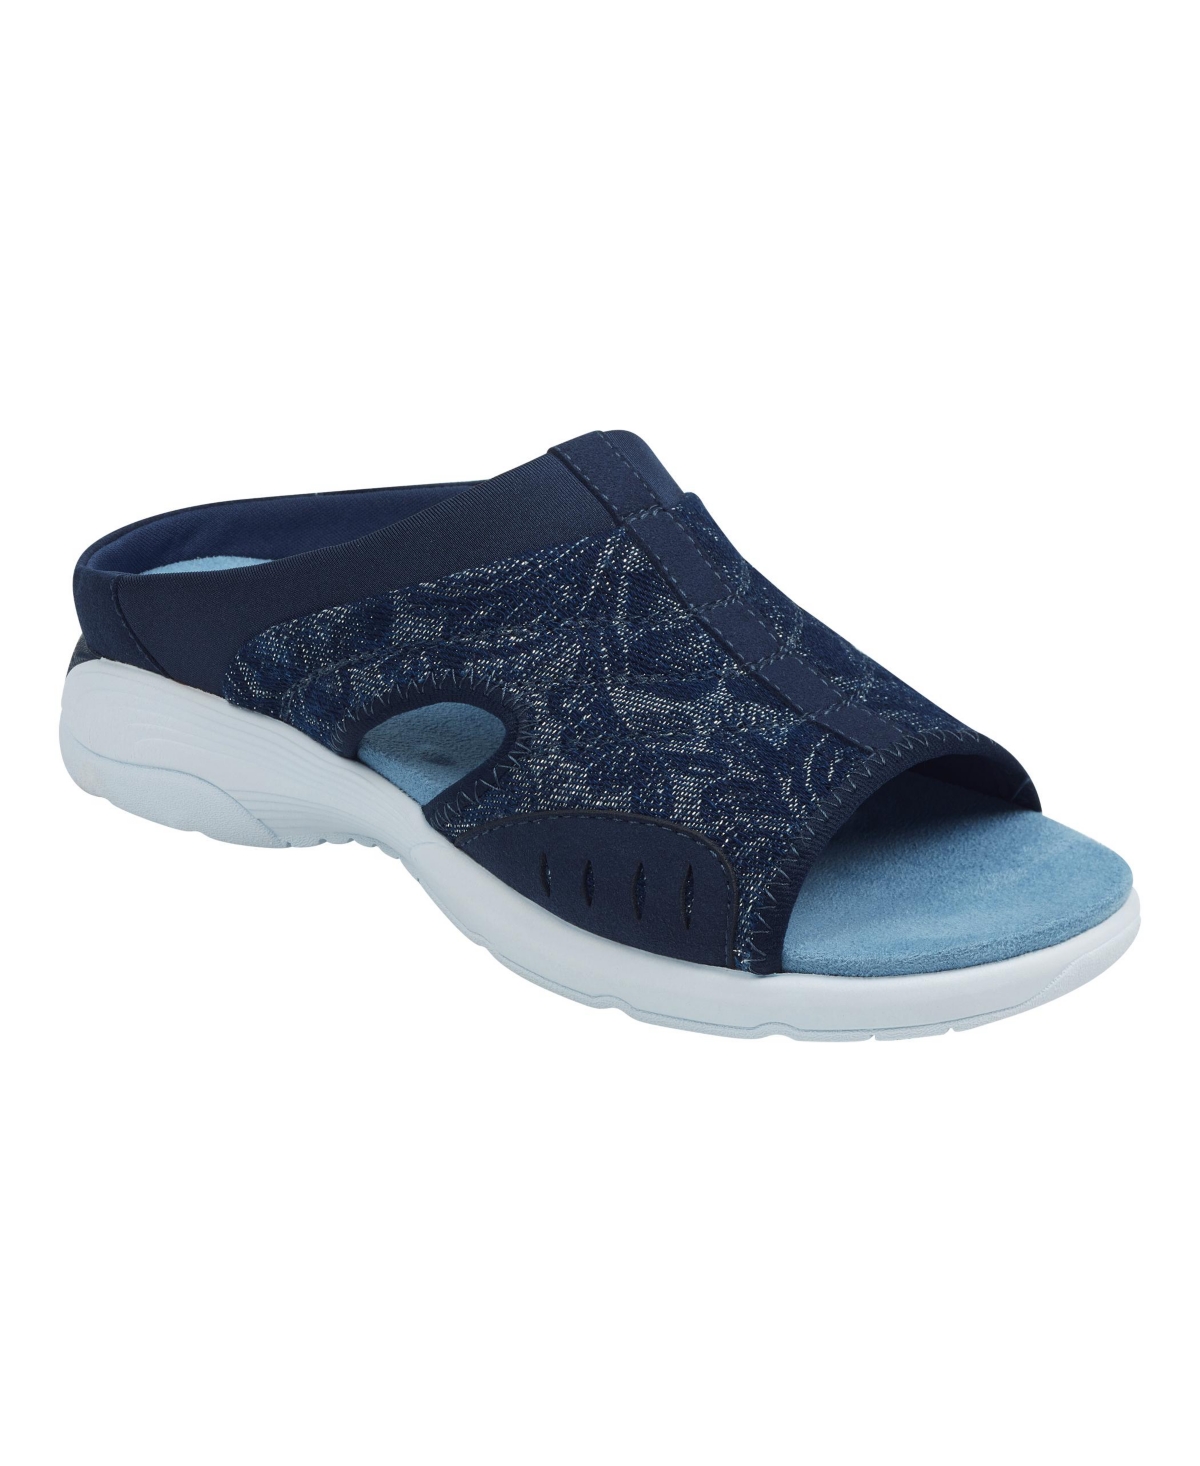 UPC 192733461965 product image for Easy Spirit Women's Traciee Square Toe Casual Flat Sandals Women's Shoes | upcitemdb.com